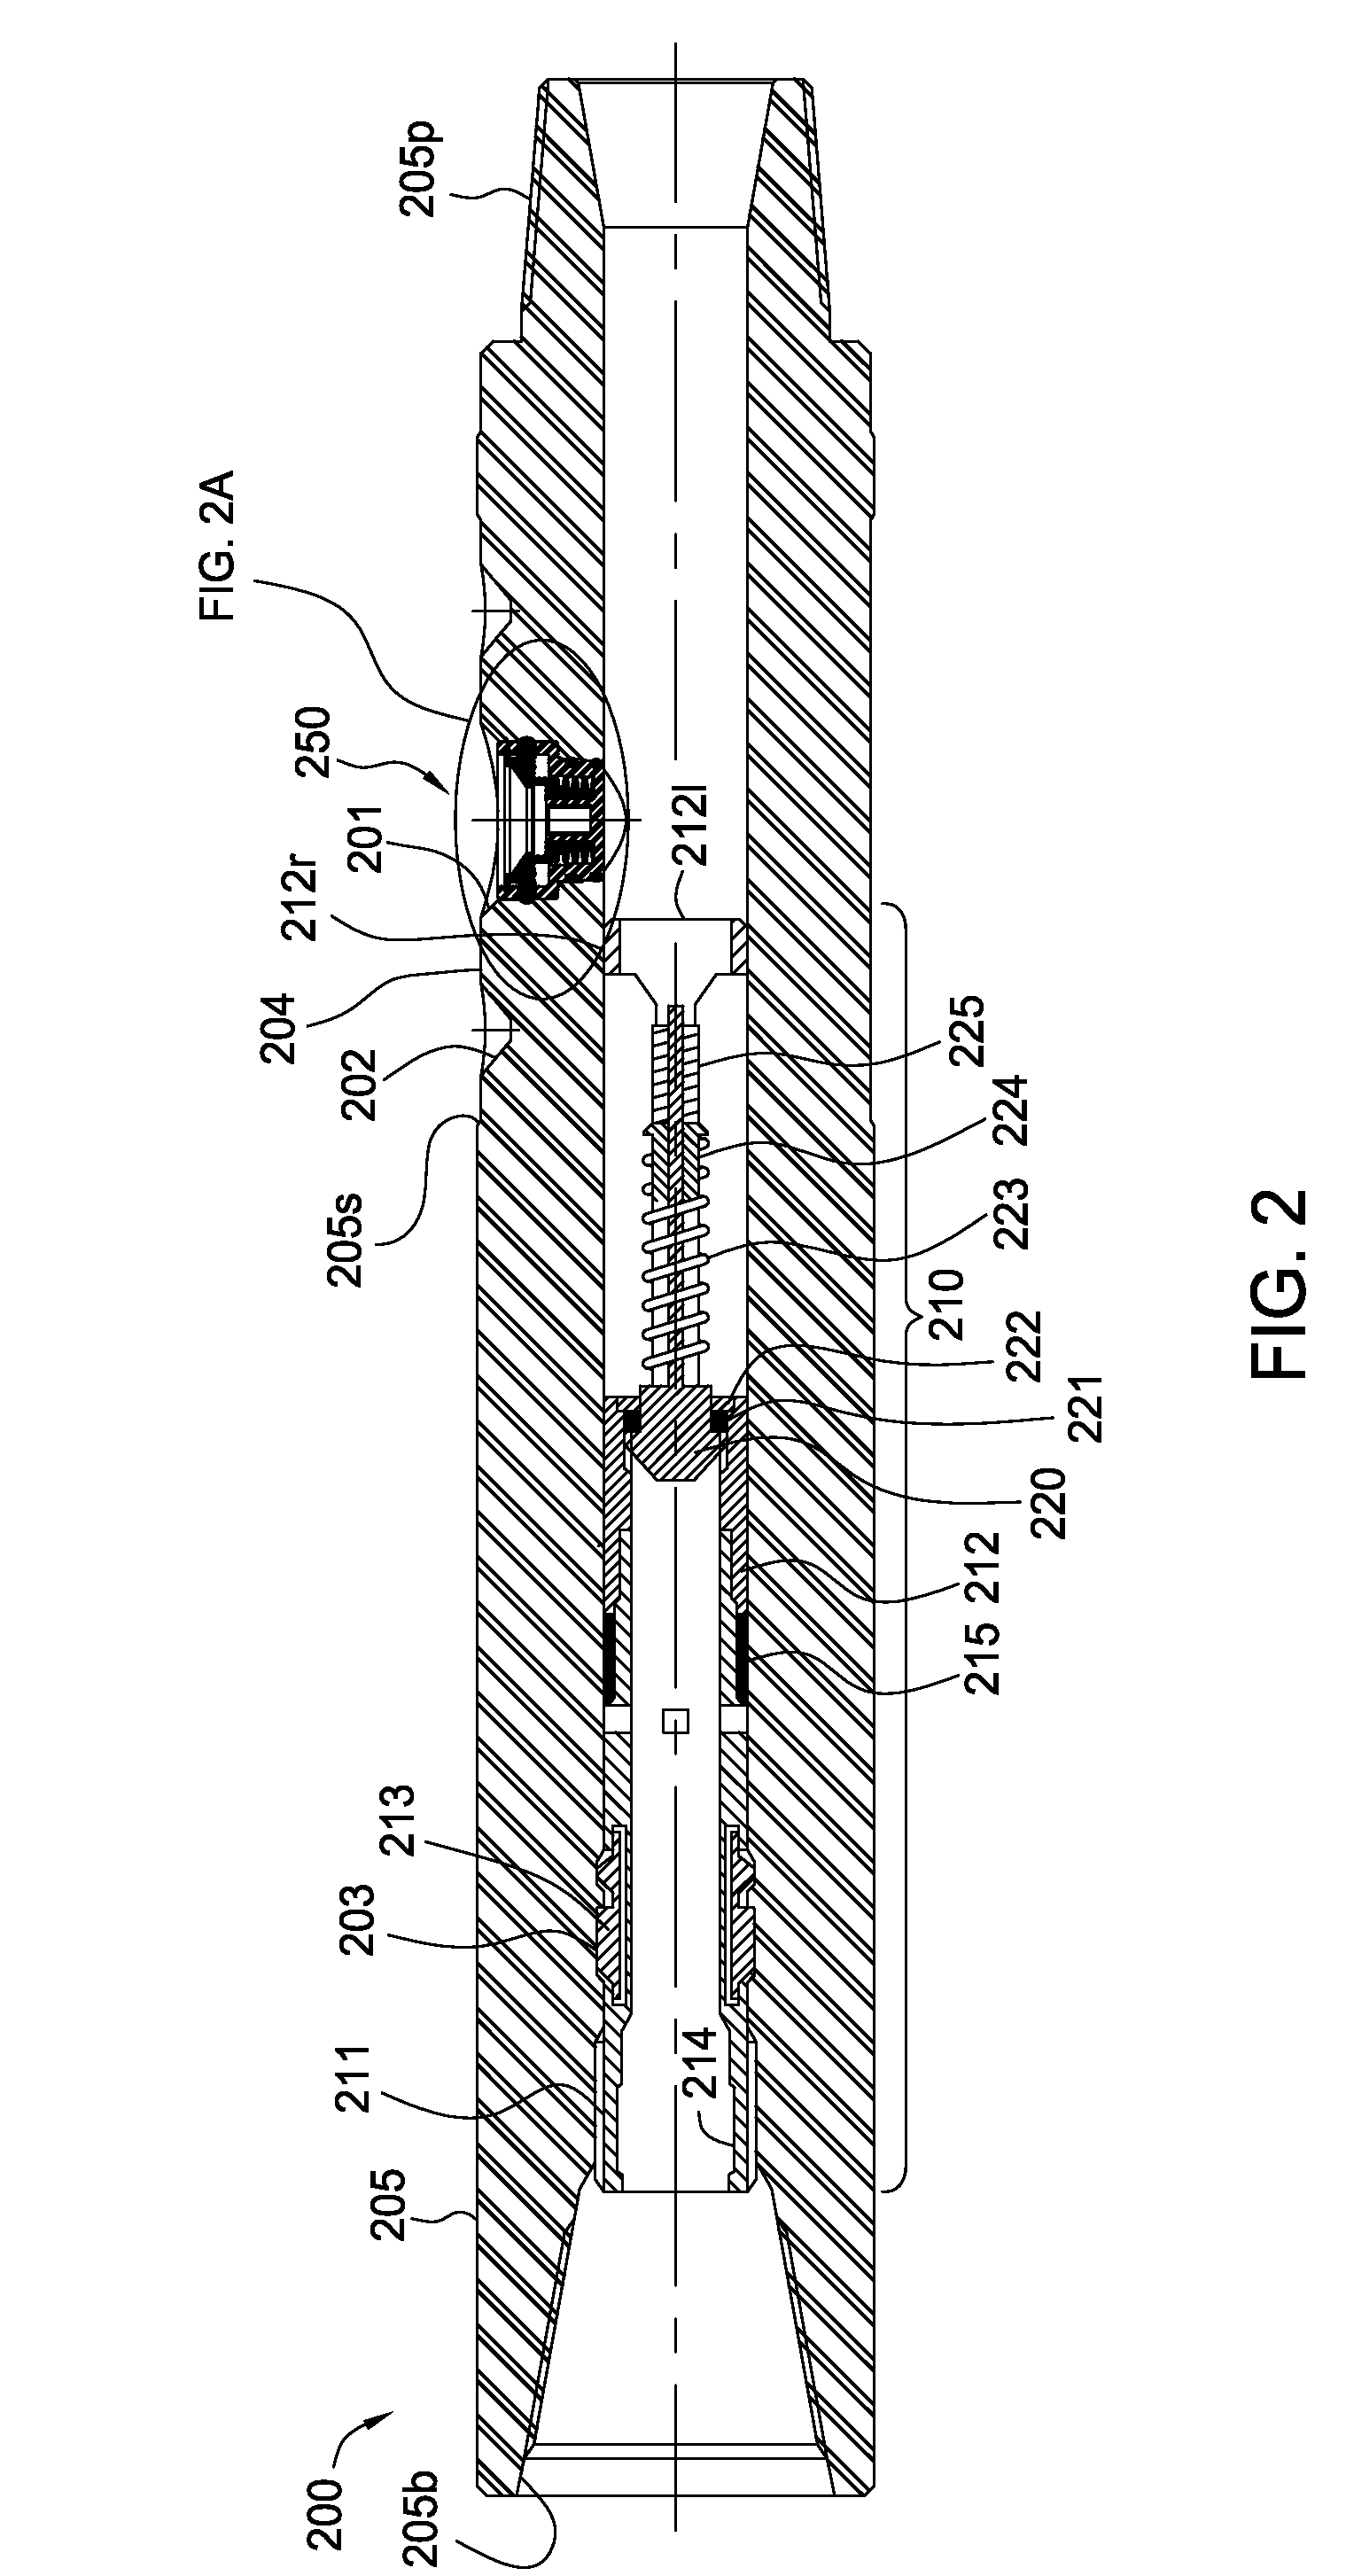 Continuous flow drilling systems and methods